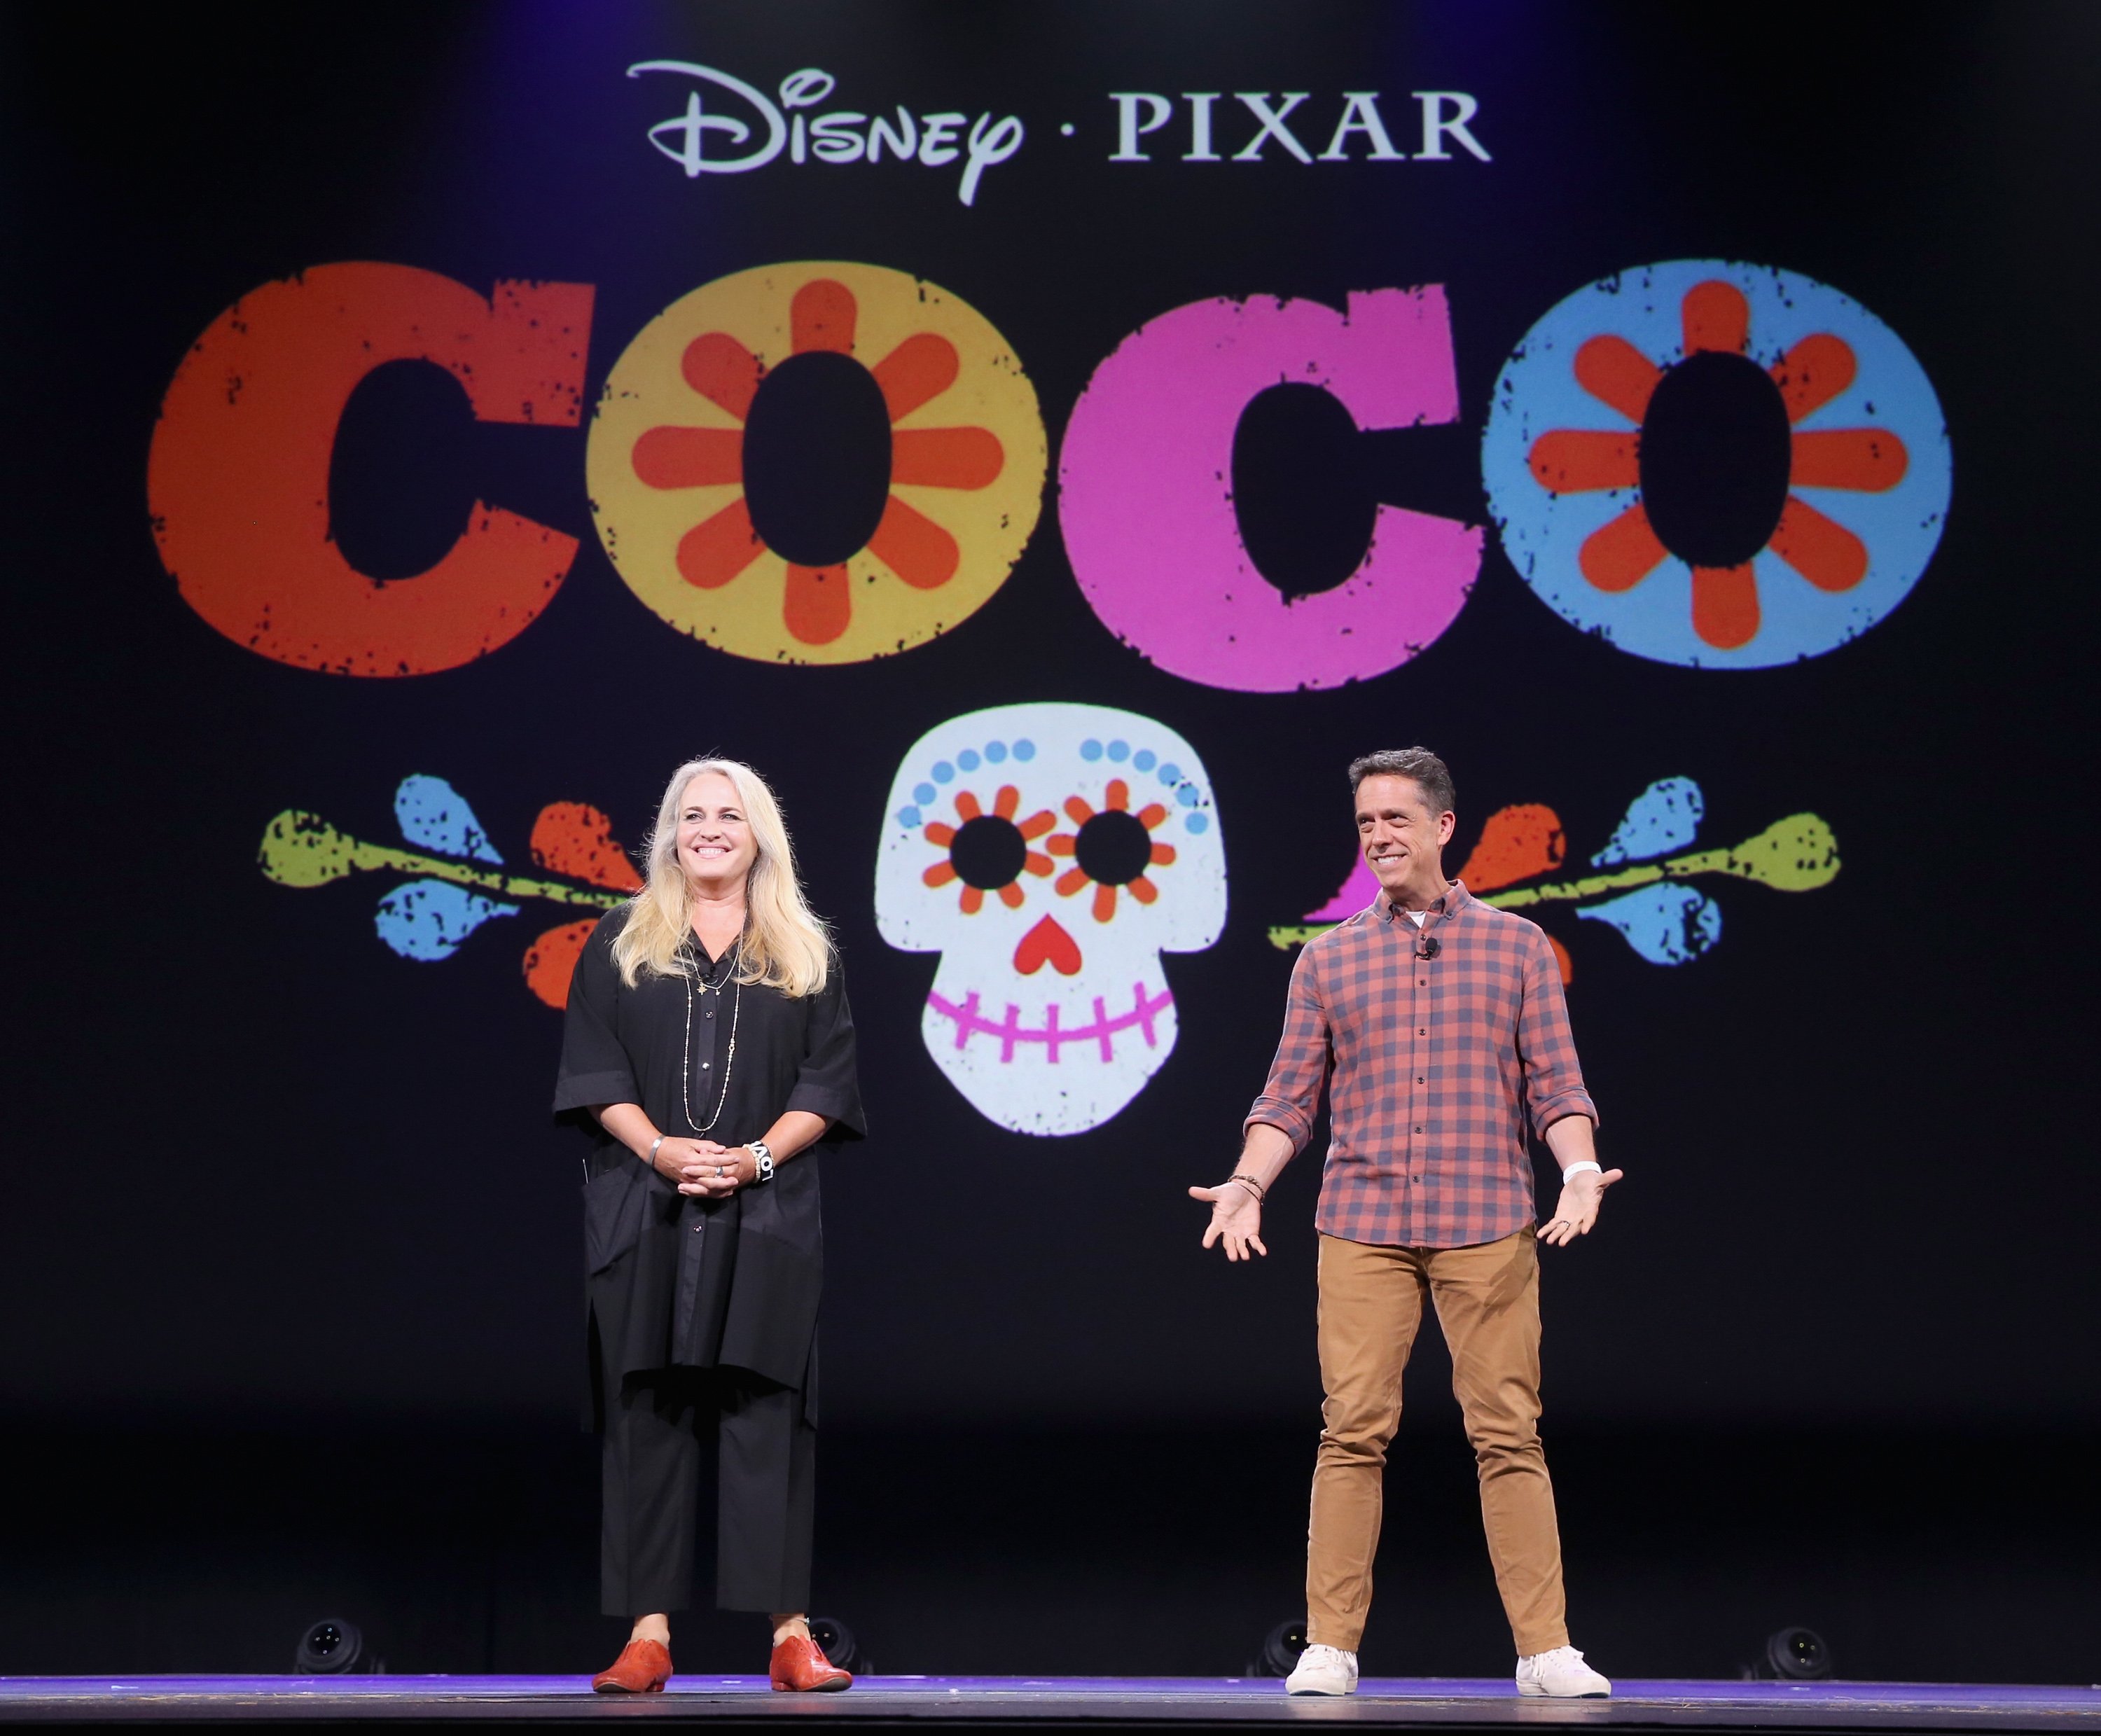 Producer Darla K. Anderson and director Lee Unkrich of 'Coco' took part today in 'Pixar and Walt Disney Animation Studios: The Upcoming Films' presentation